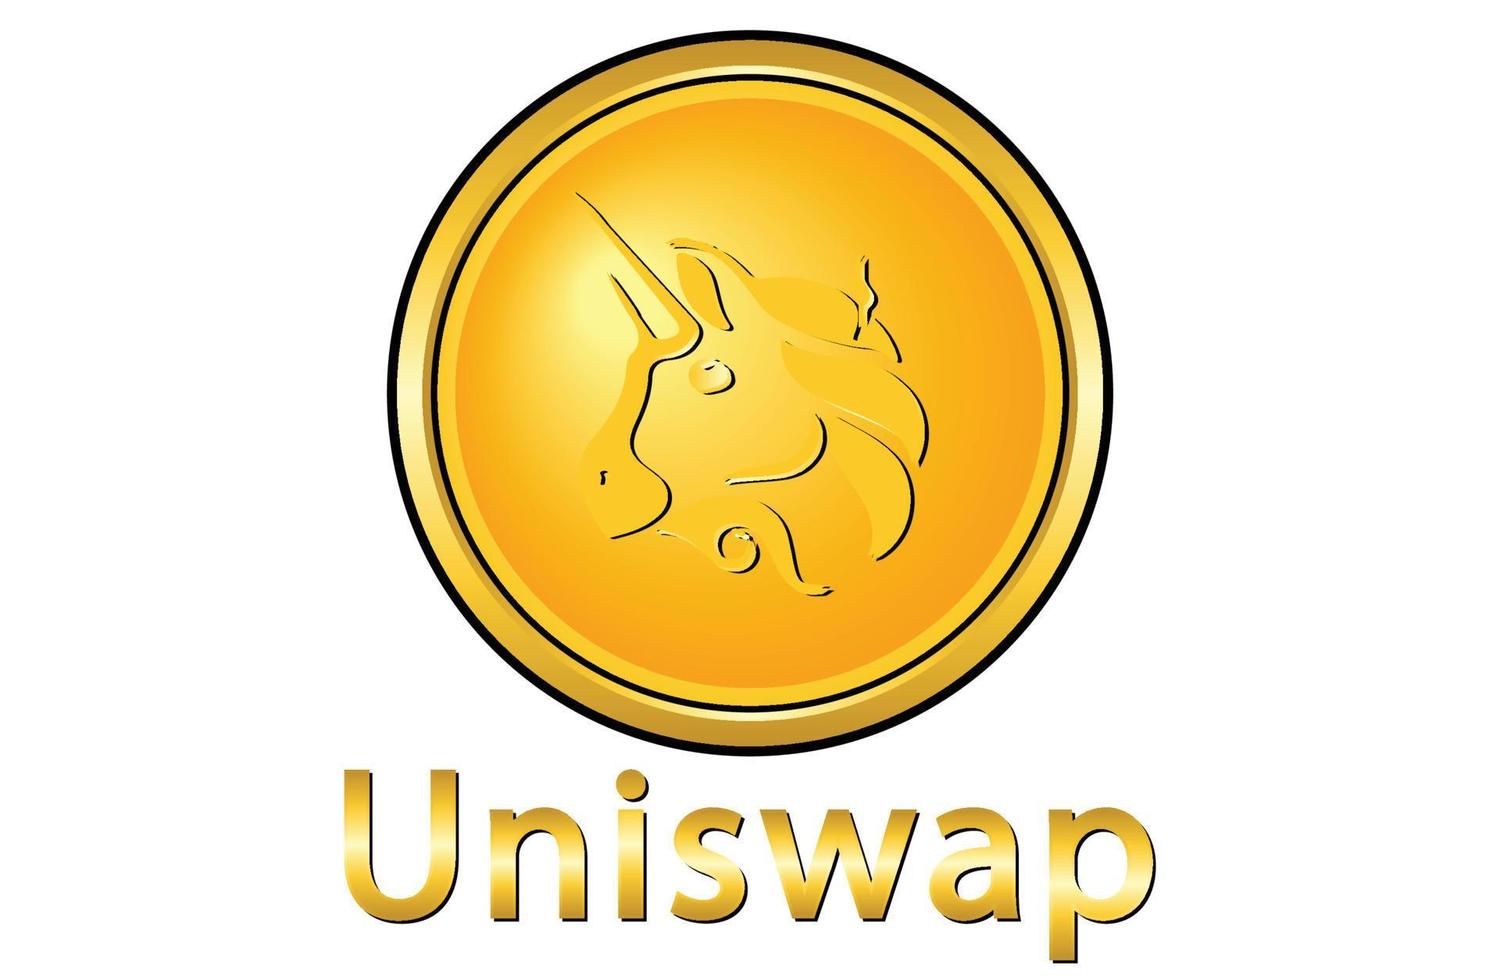 Uniswap crypto currency logo with text on gold colour vector